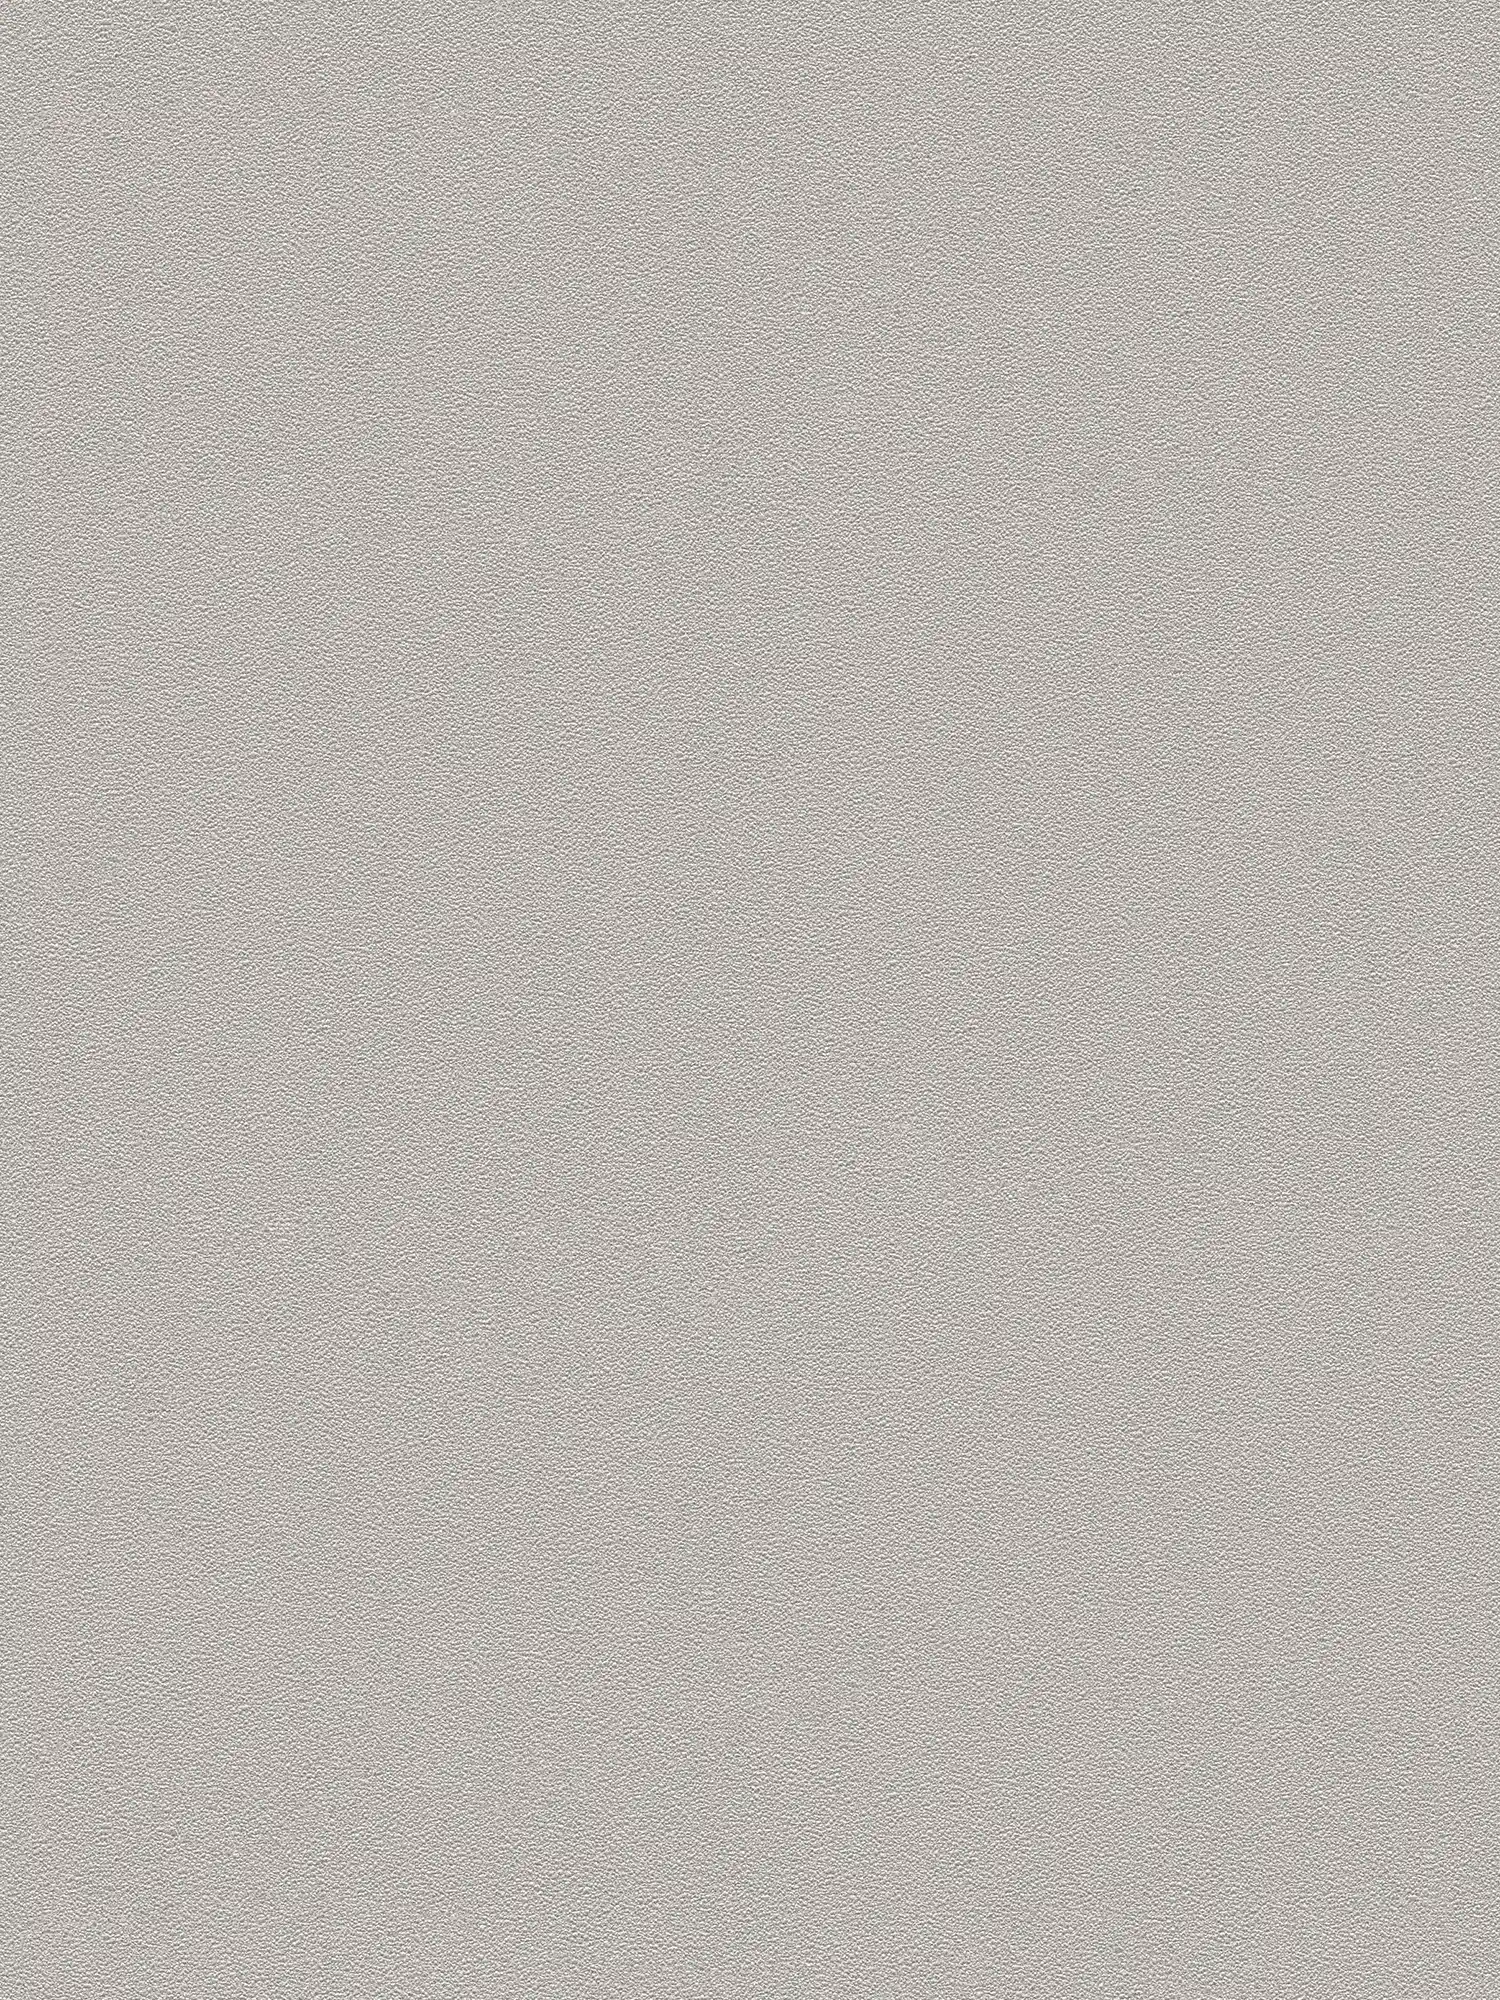 Plain wallpaper natural colour and texture pattern - grey, brown
